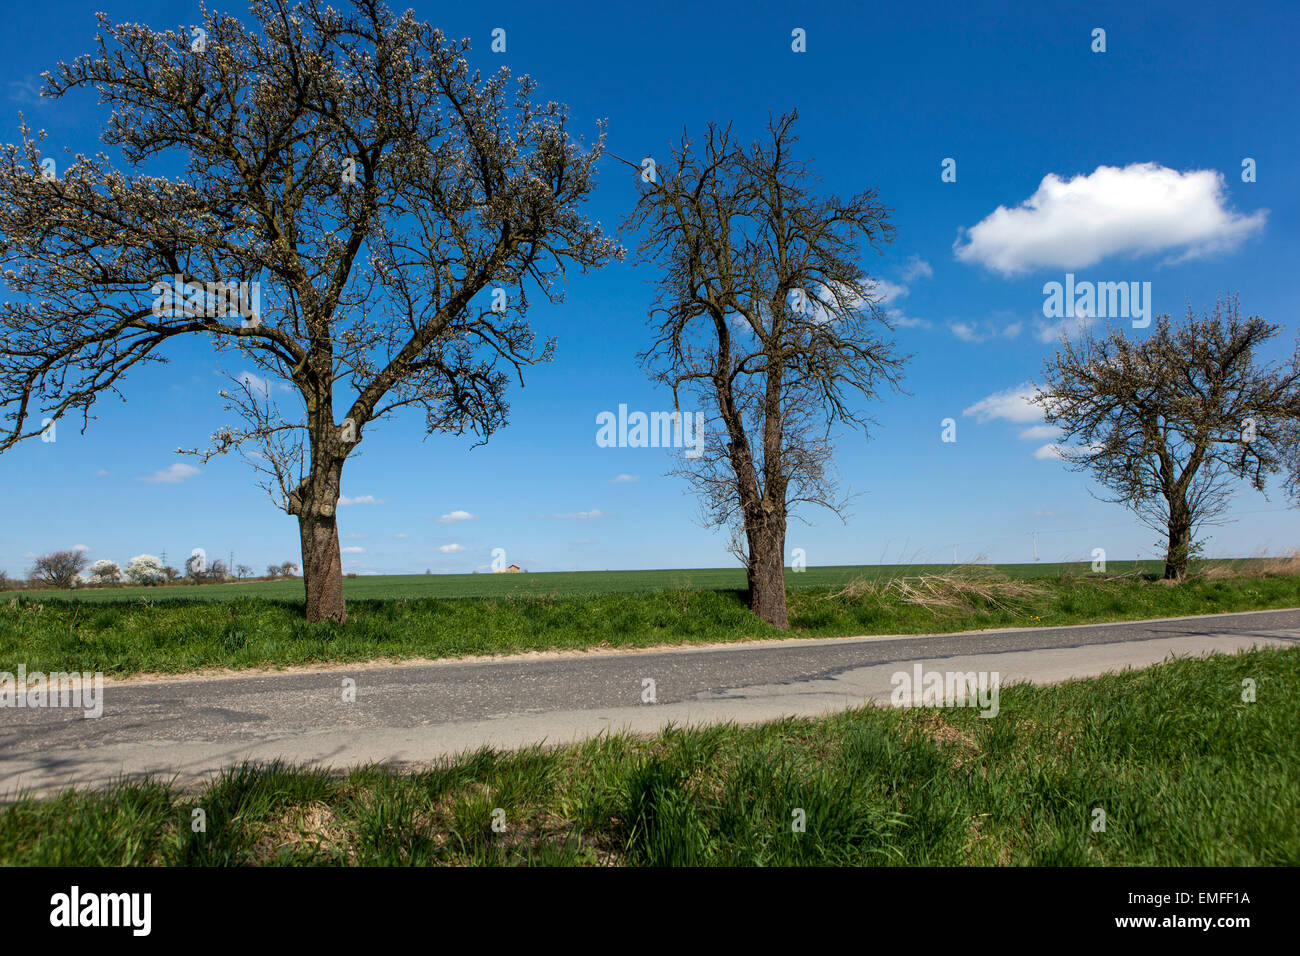 Roadside trees by the road, spring landscape Stock Photo